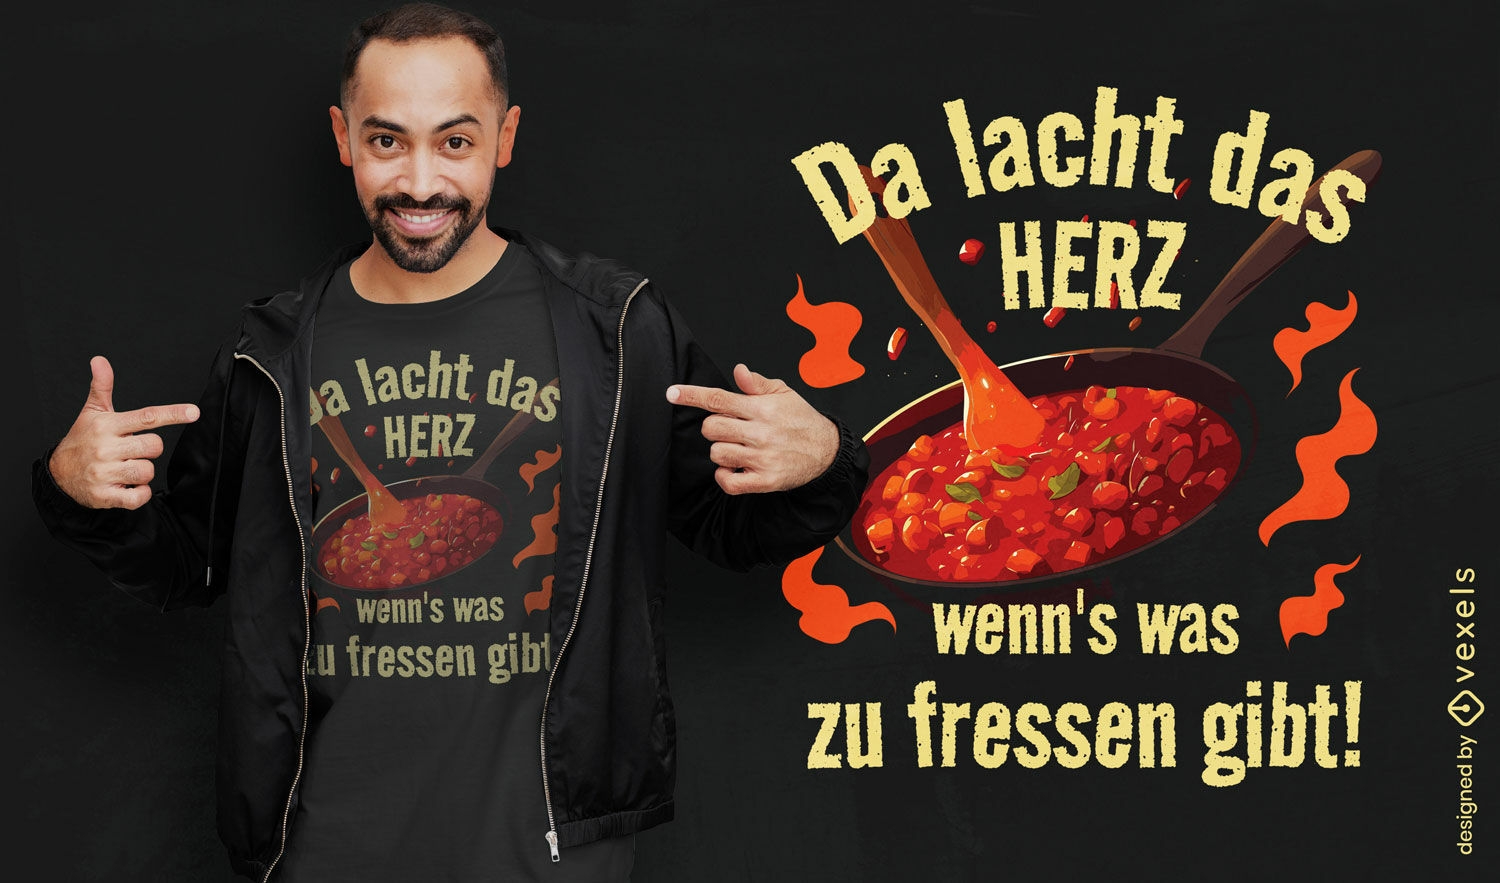 German culinary quote t-shirt design